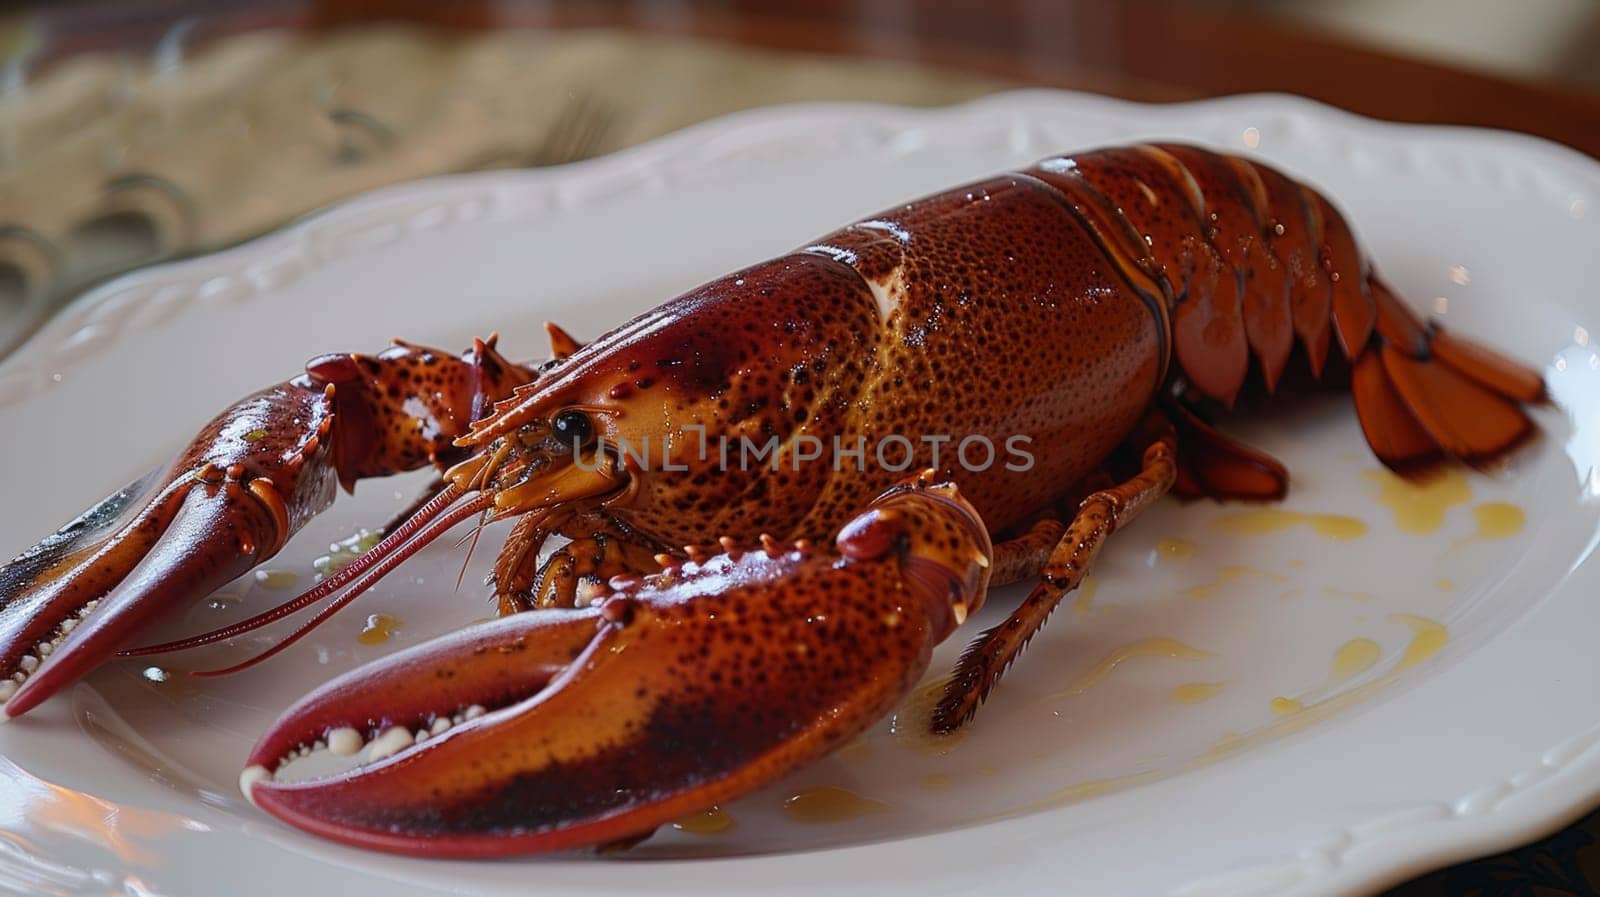 A large lobster sitting on a white plate with some sauce